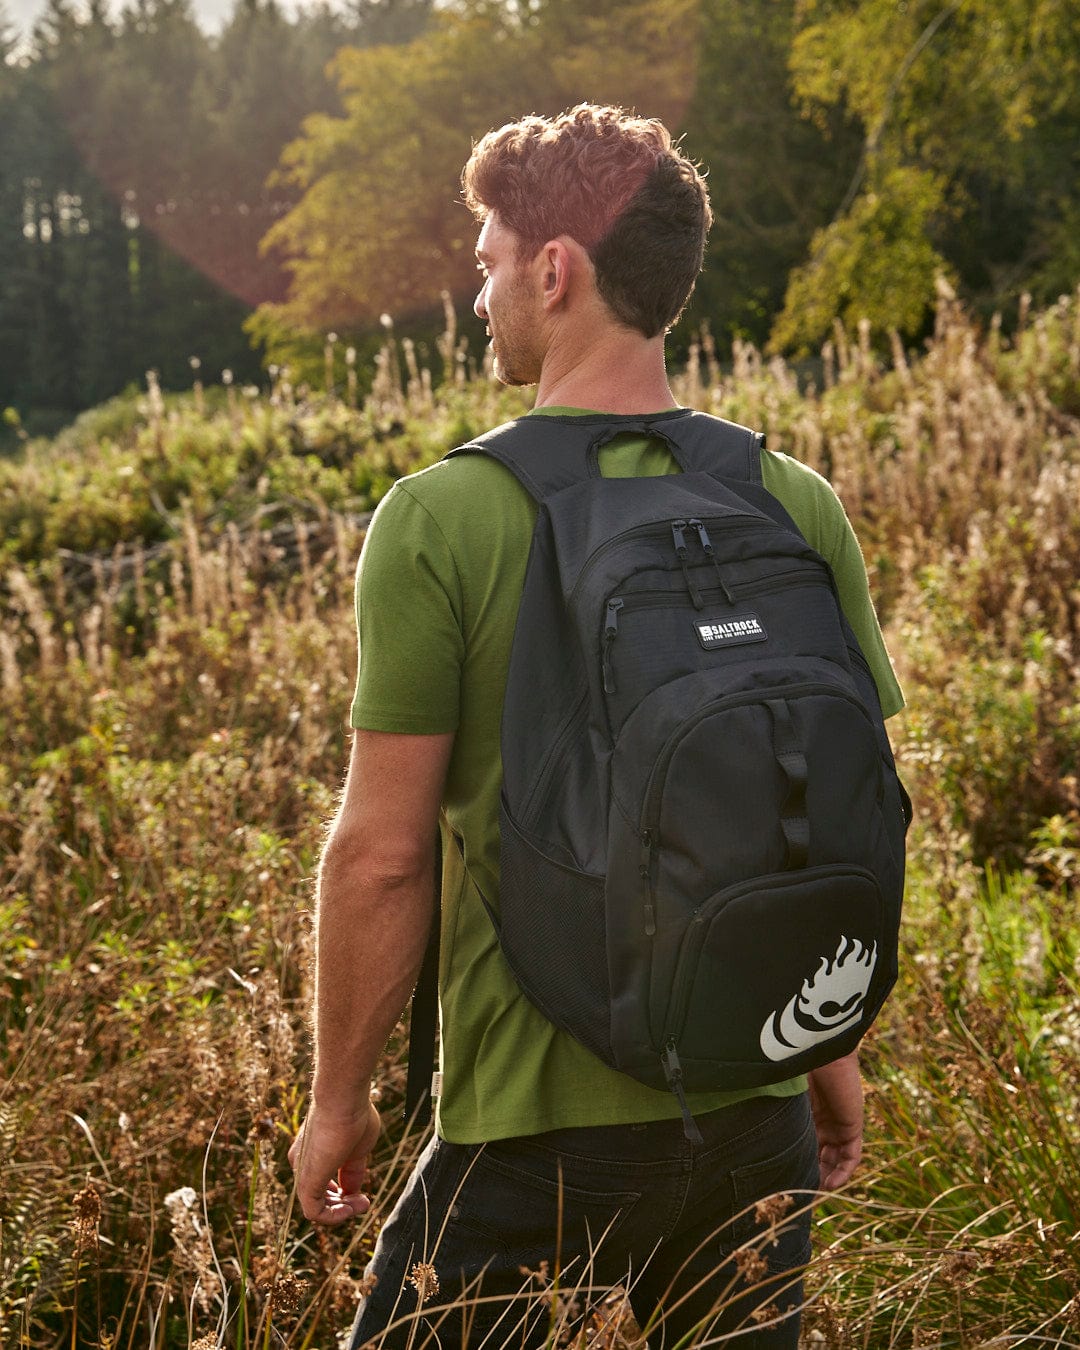 A man walking through a field with a Saltrock Boardwalk - Backpack - Black, made of water-resistant ripstop fabric and equipped with a cooler pocket.